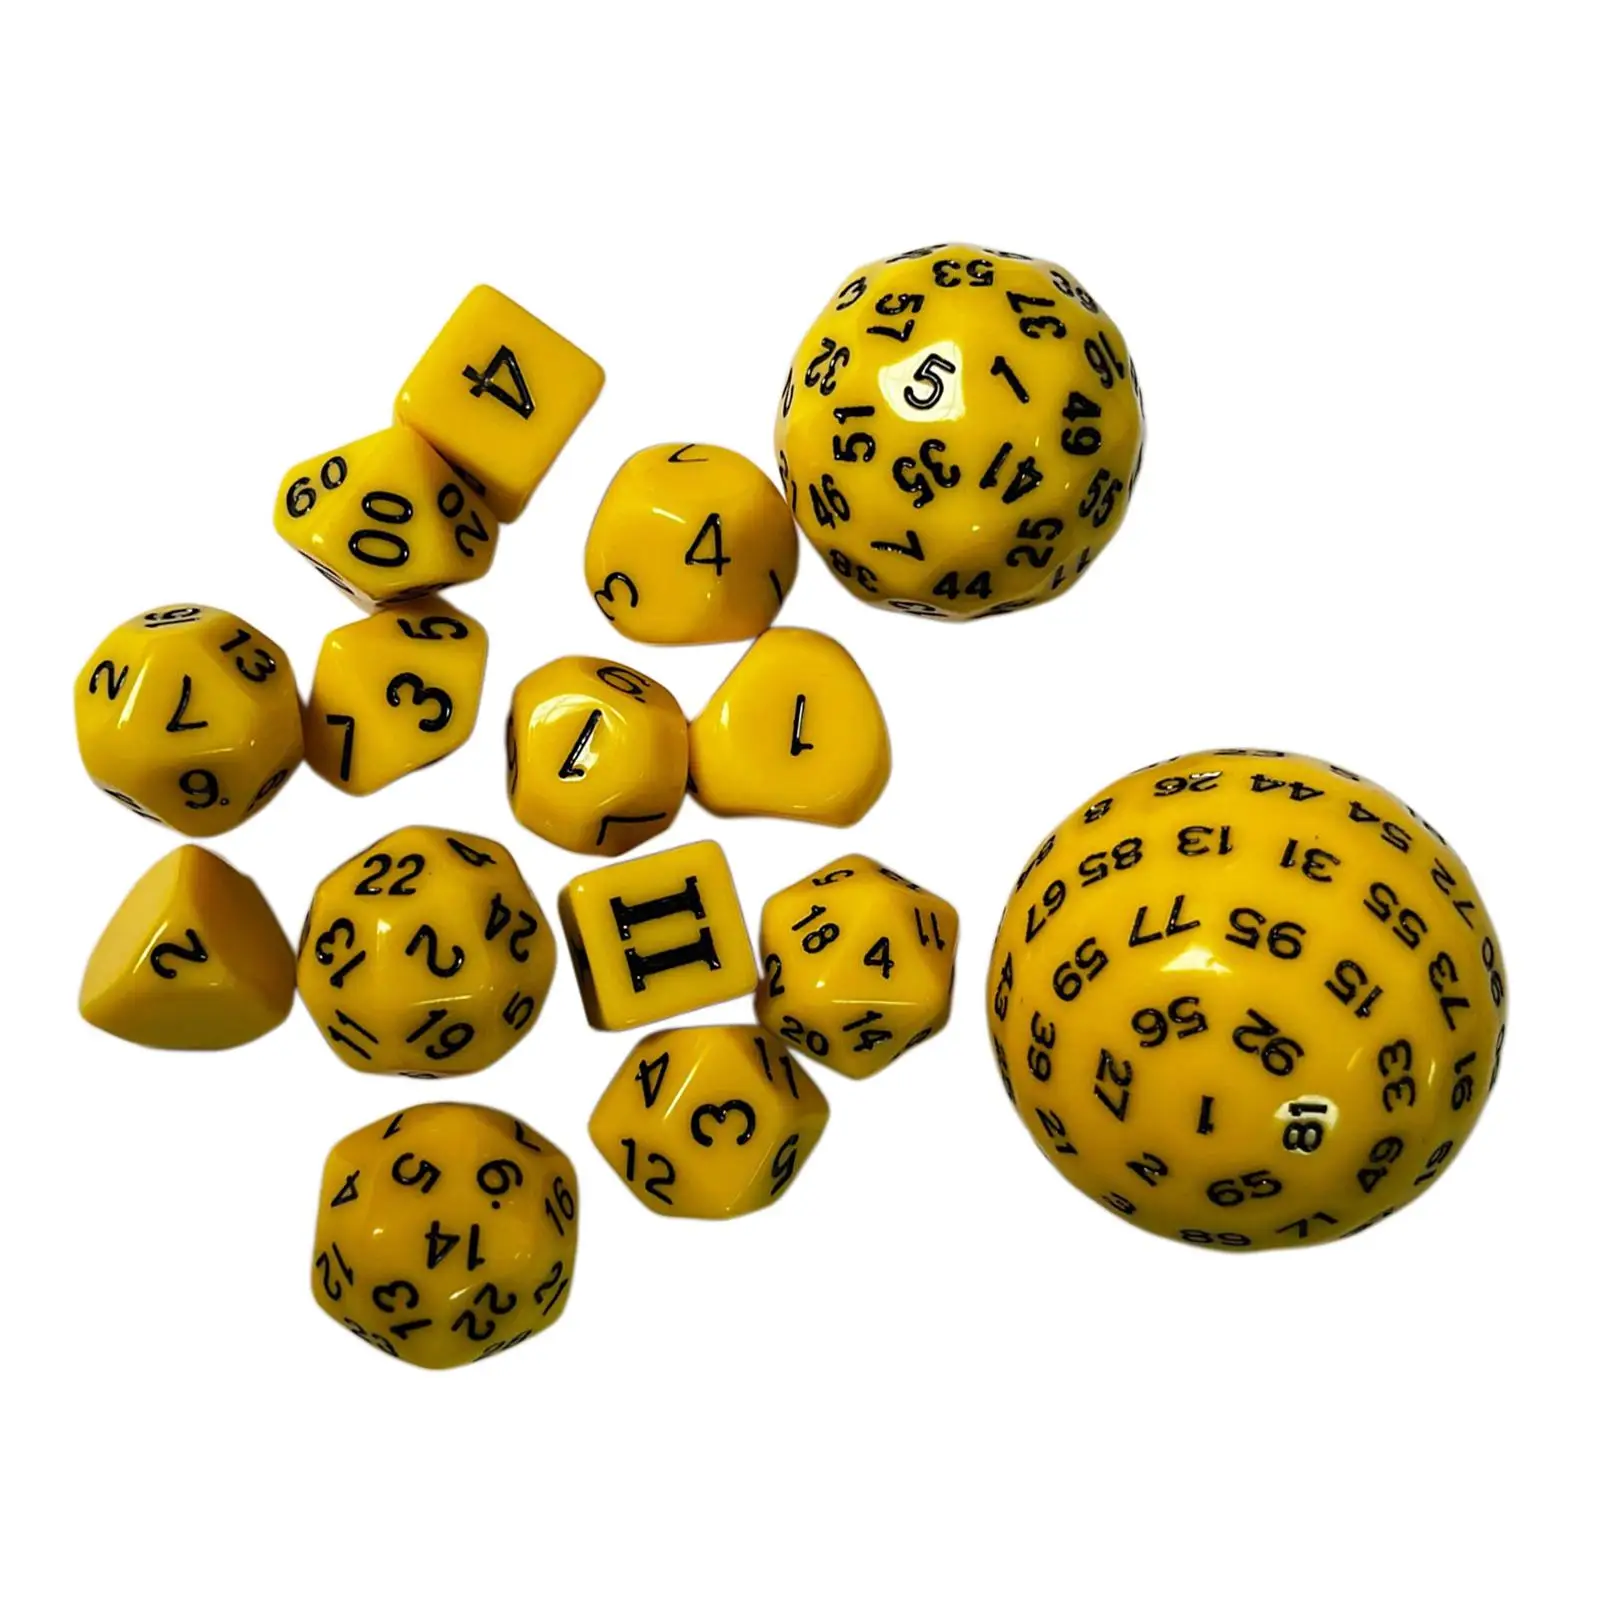 15 Pieces D100 D60 D30 D24 D20 D16 D12 D10 D8 D7 D5 D4 Dice Set Dice Game RPG Role Playing for Board Game Role Playing